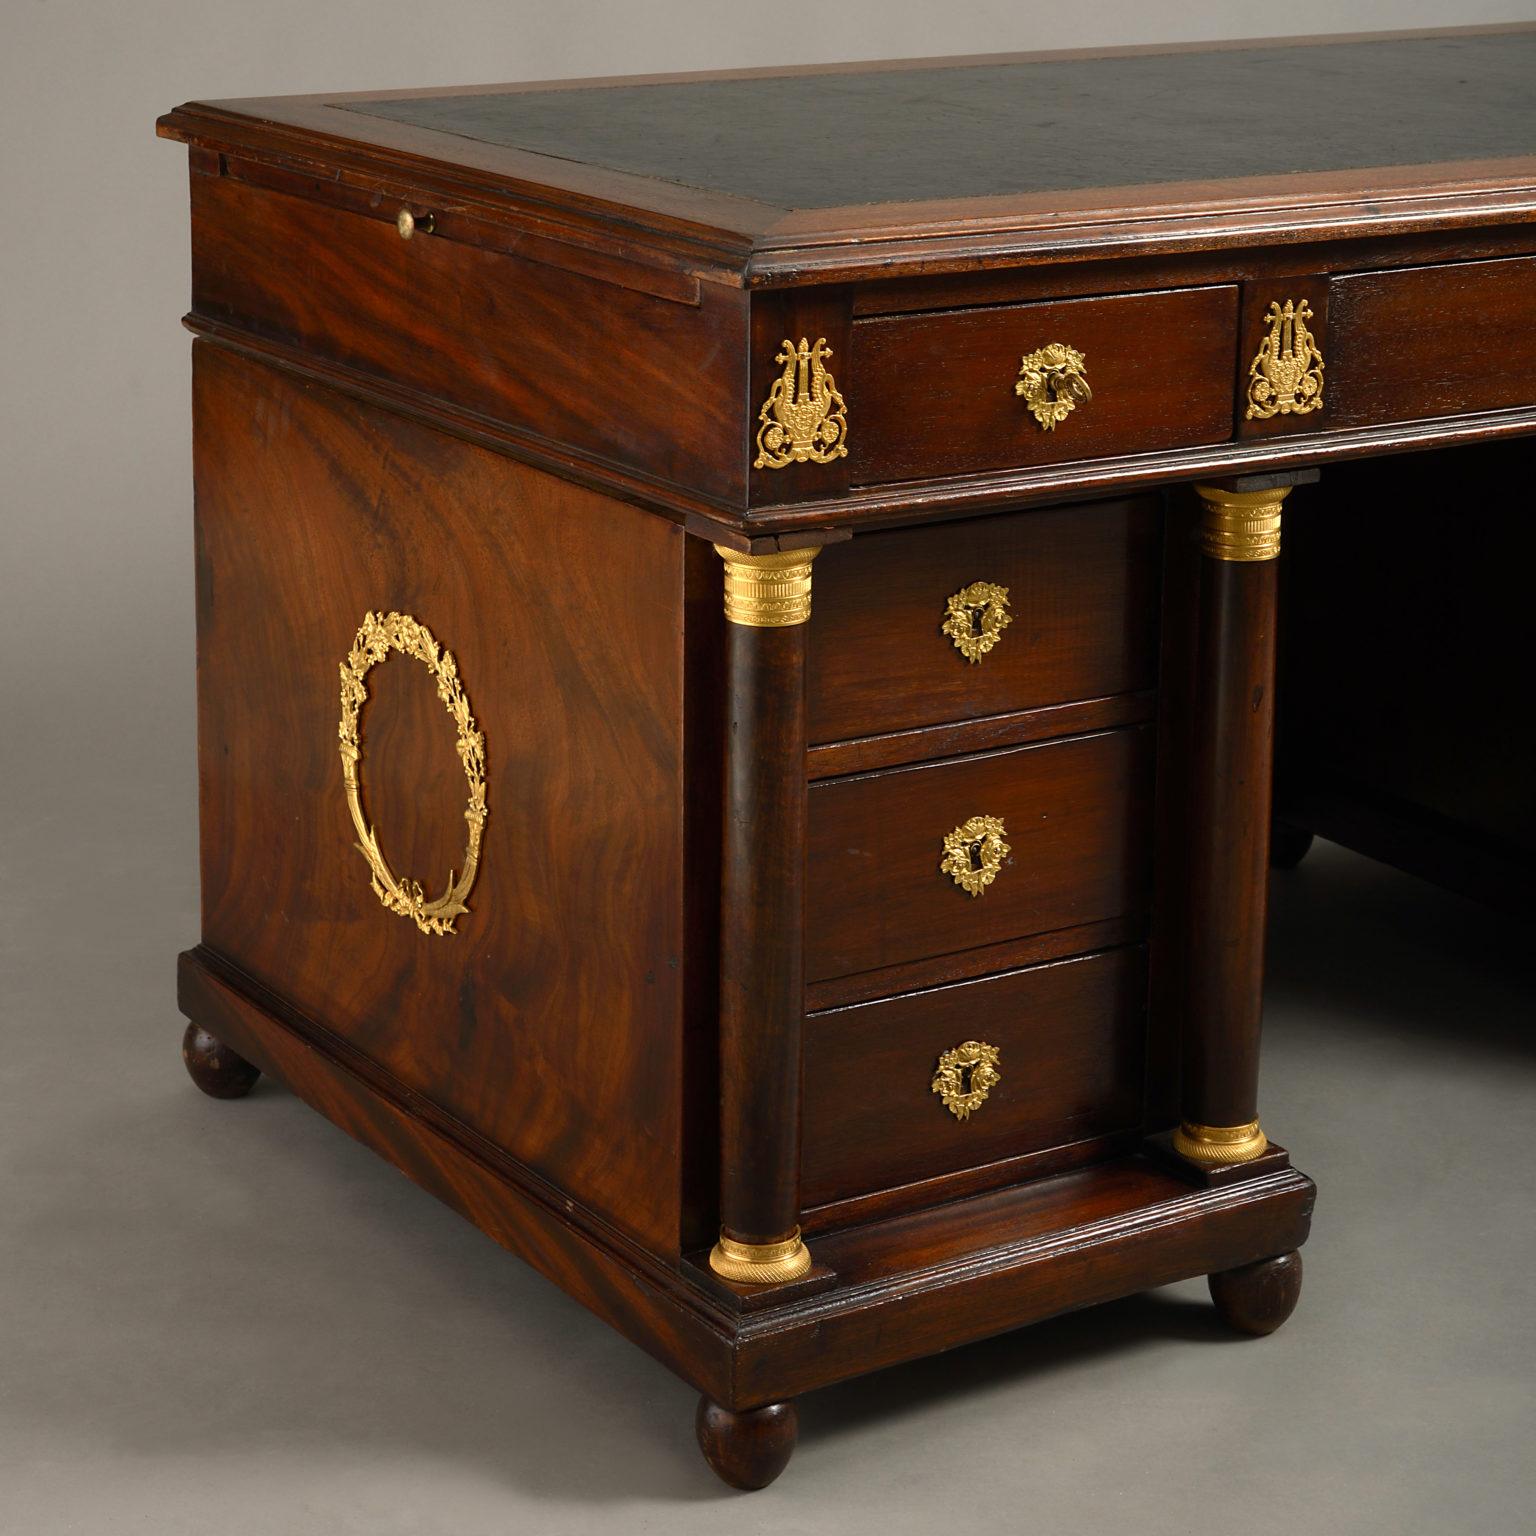 French Empire Style Mahogany and Gilt Brass Desk